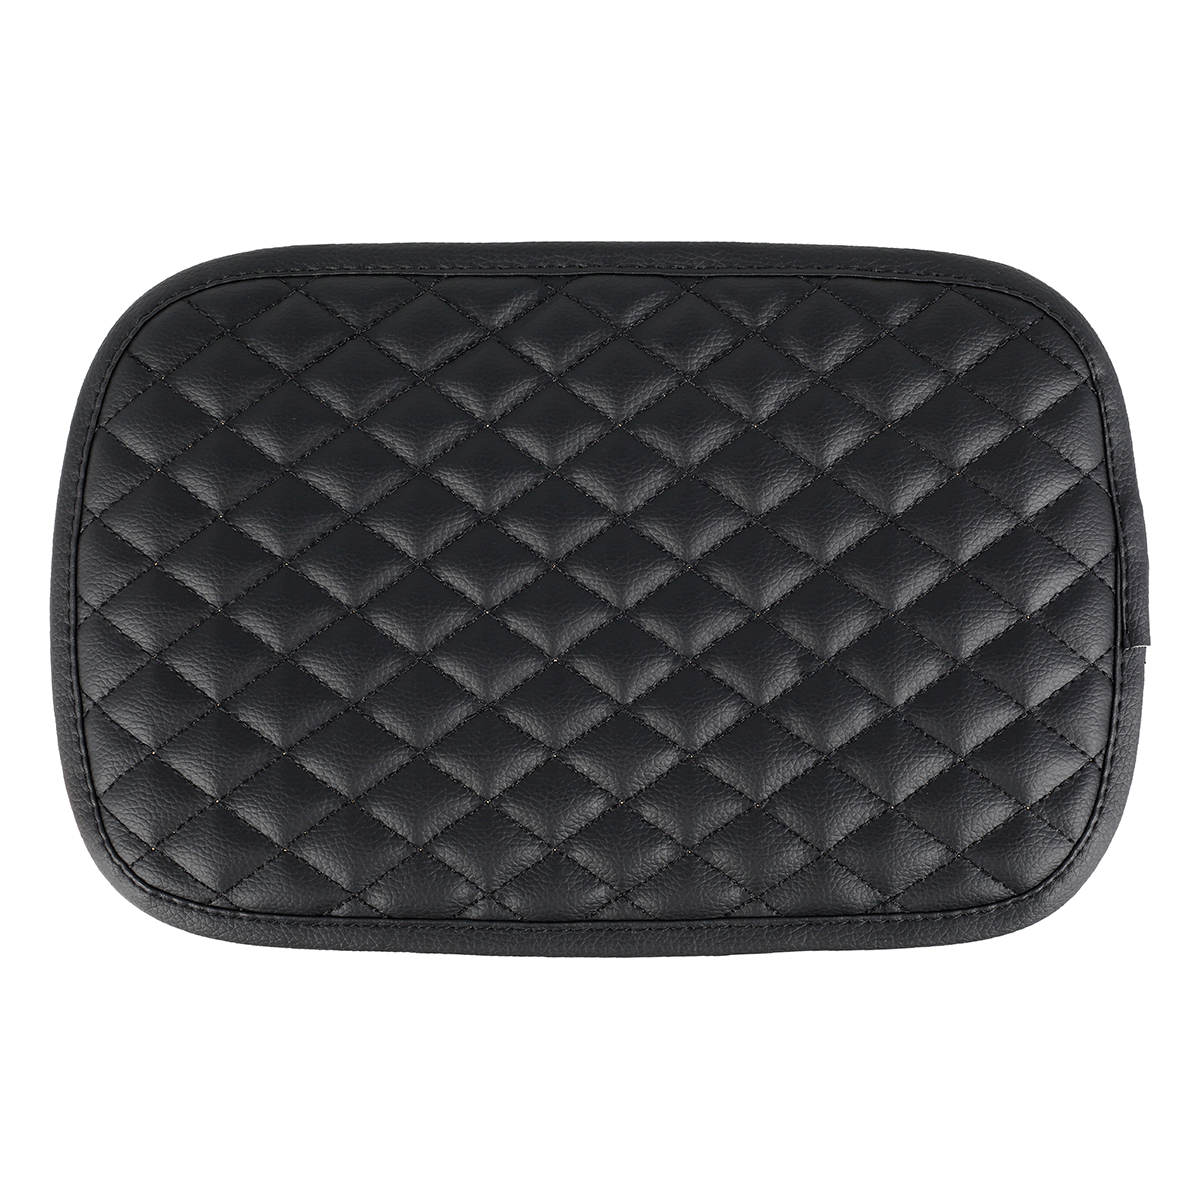 Car Armrest Cover Universal Car Armrest Pad Waterproof Car Center Console Cover 11.8 x 7.87 Inch Car Armrest Seat Box Cover Protector Car Decoration Accessories for Vehicle SUV Truck Car (Black) - image 1 of 8